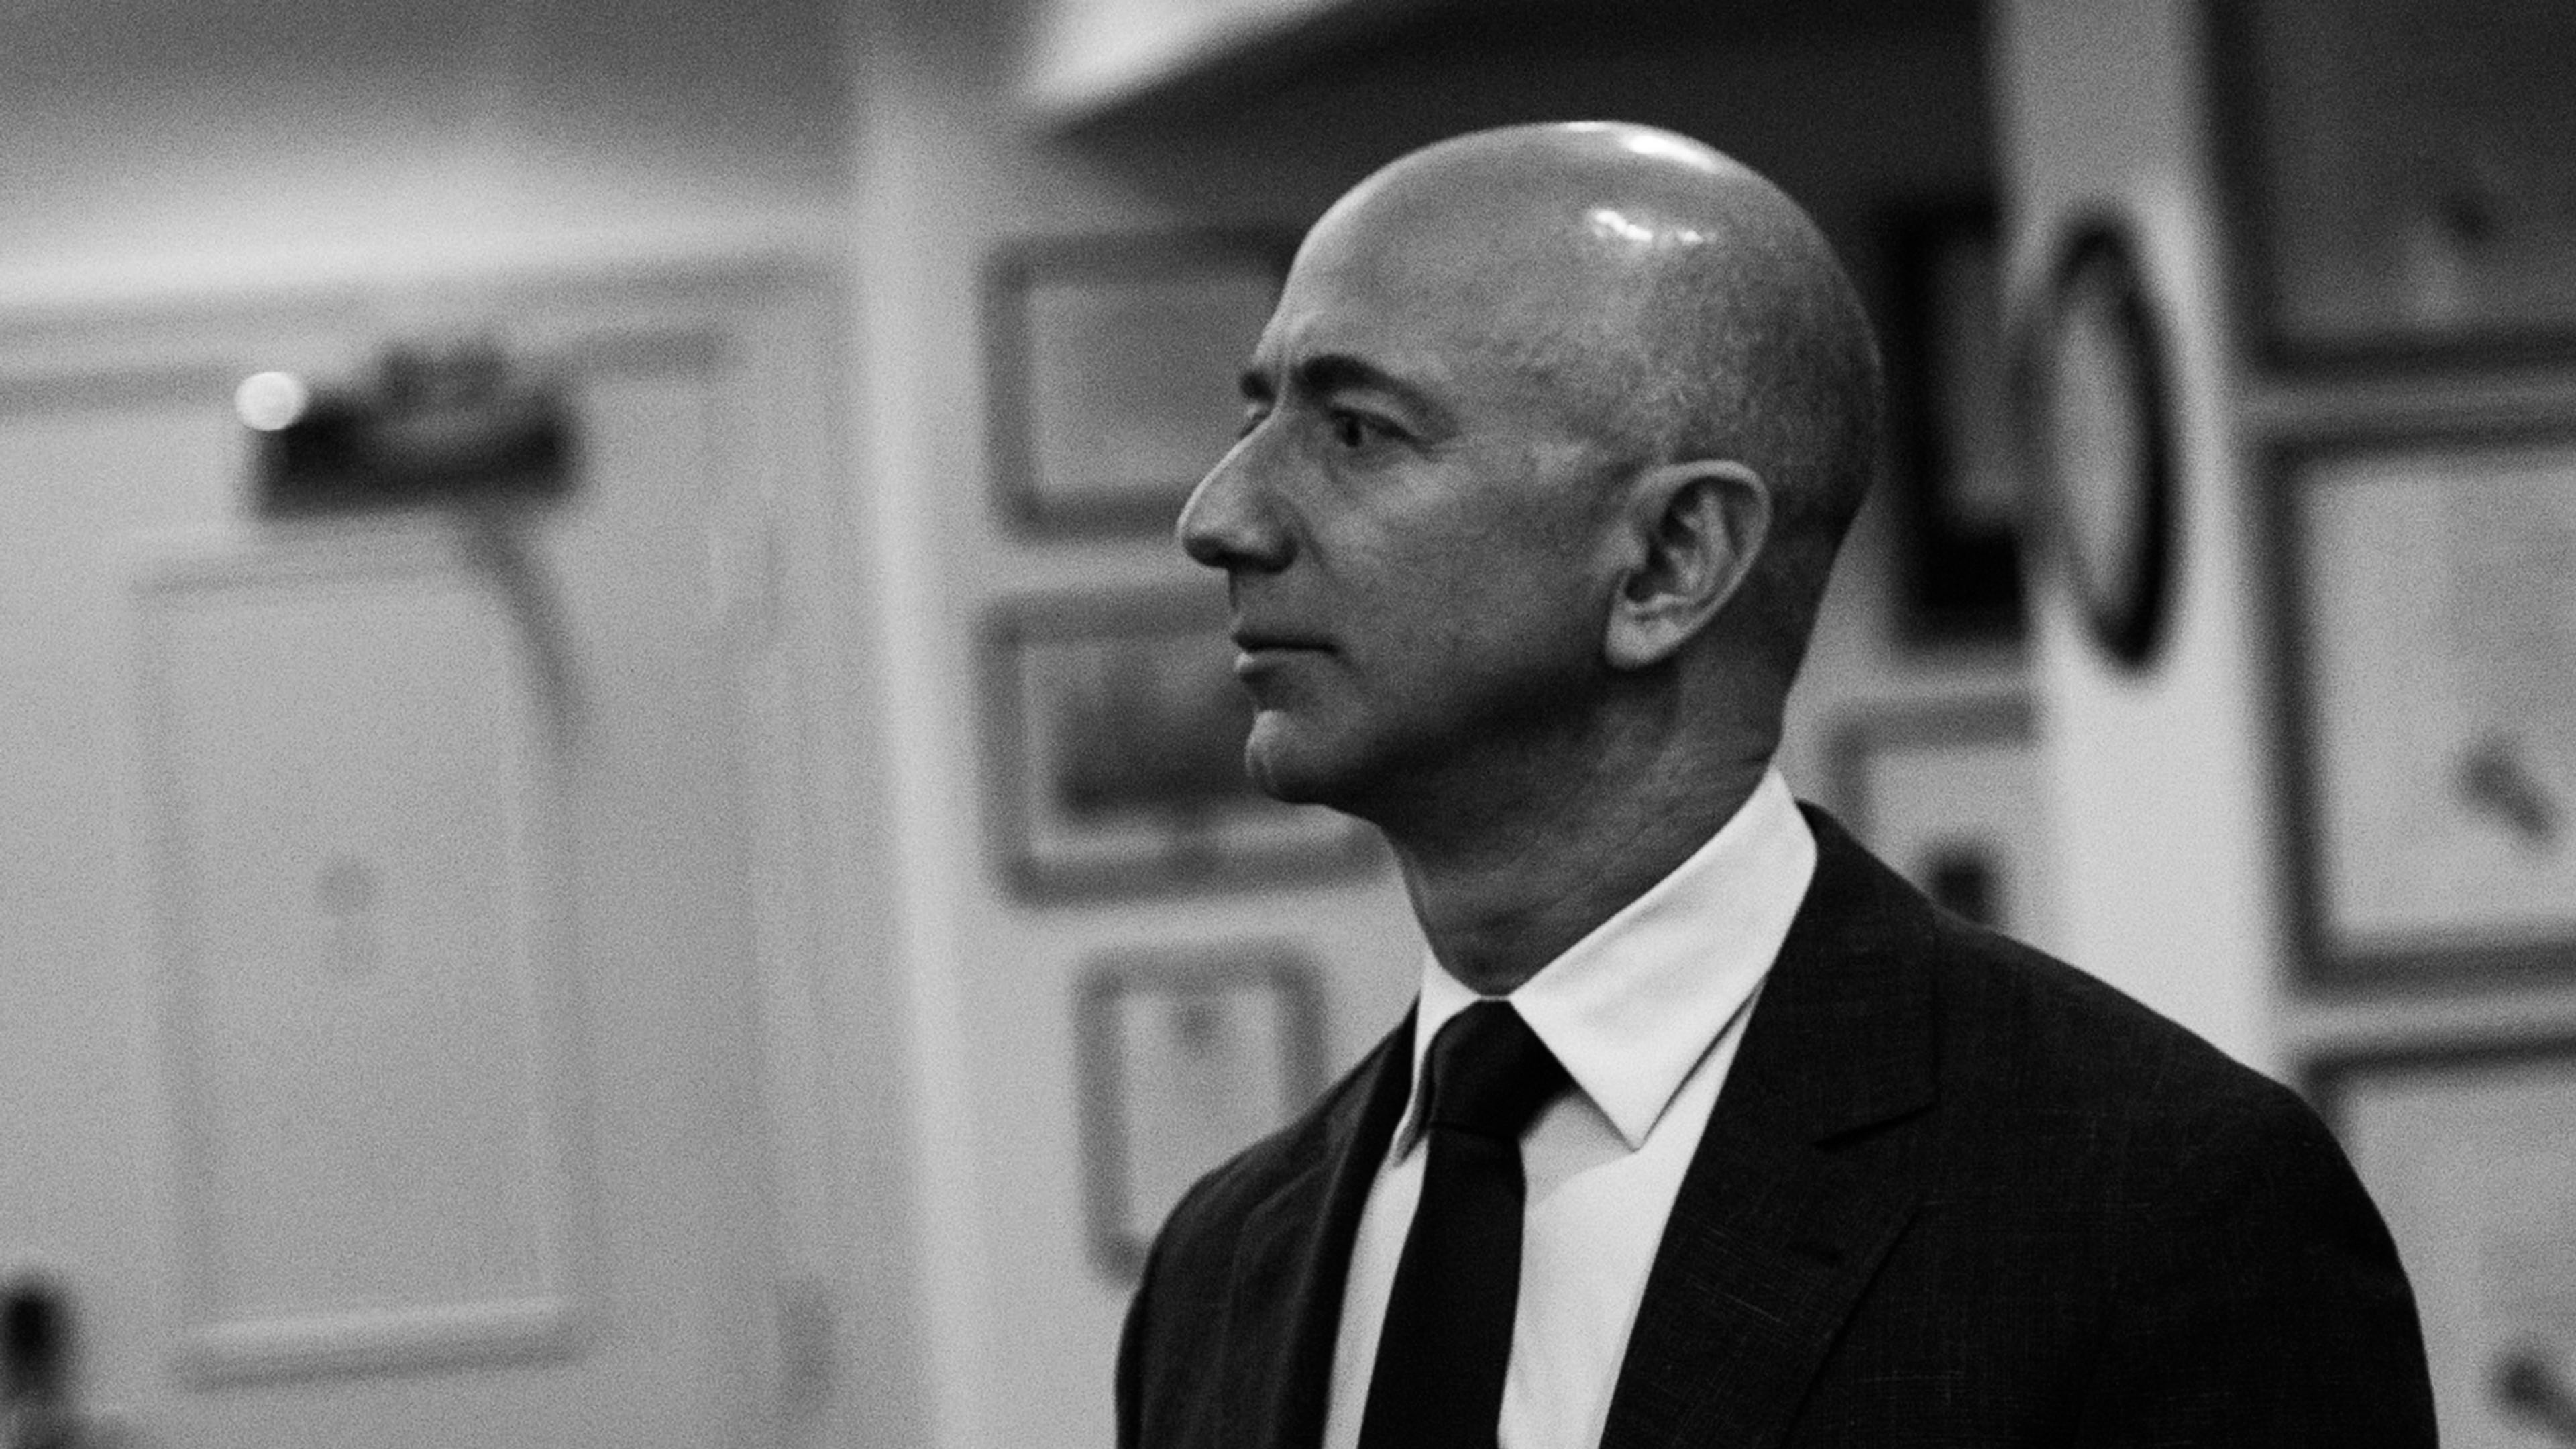 Jeff Bezos is donating money to fix a problem his company perpetuates